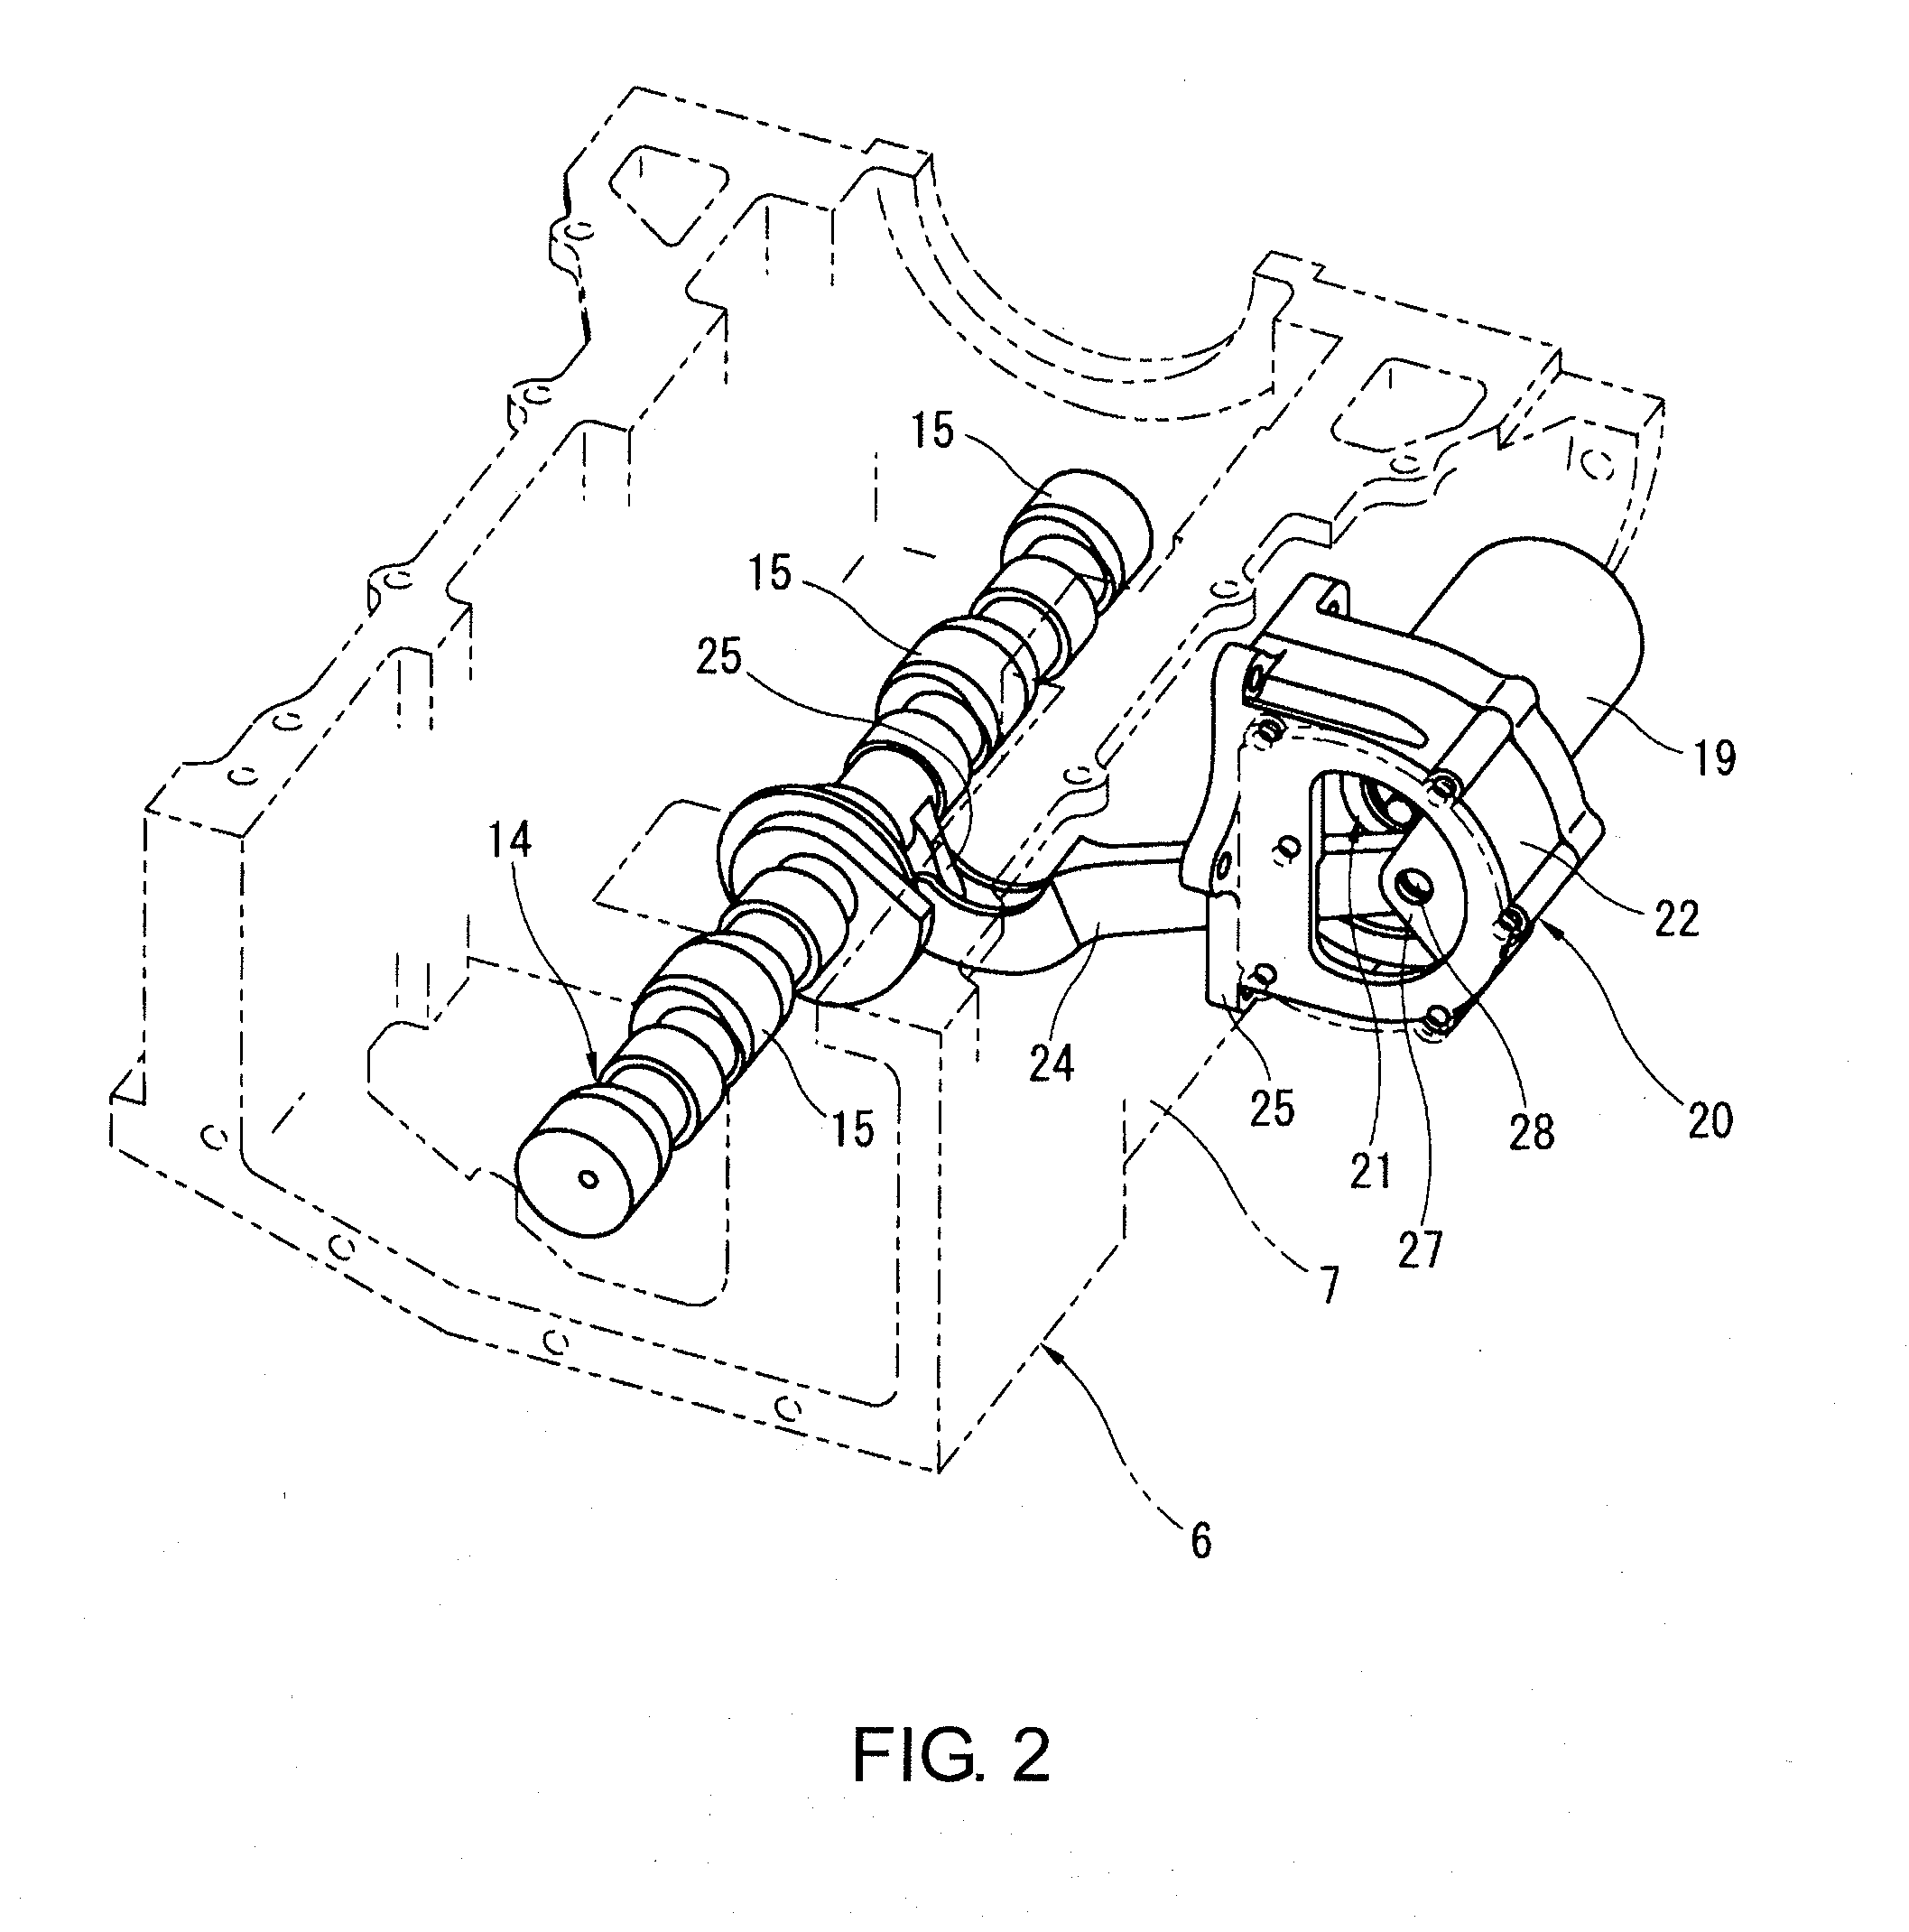 Variable compression ratio internal combustion engine